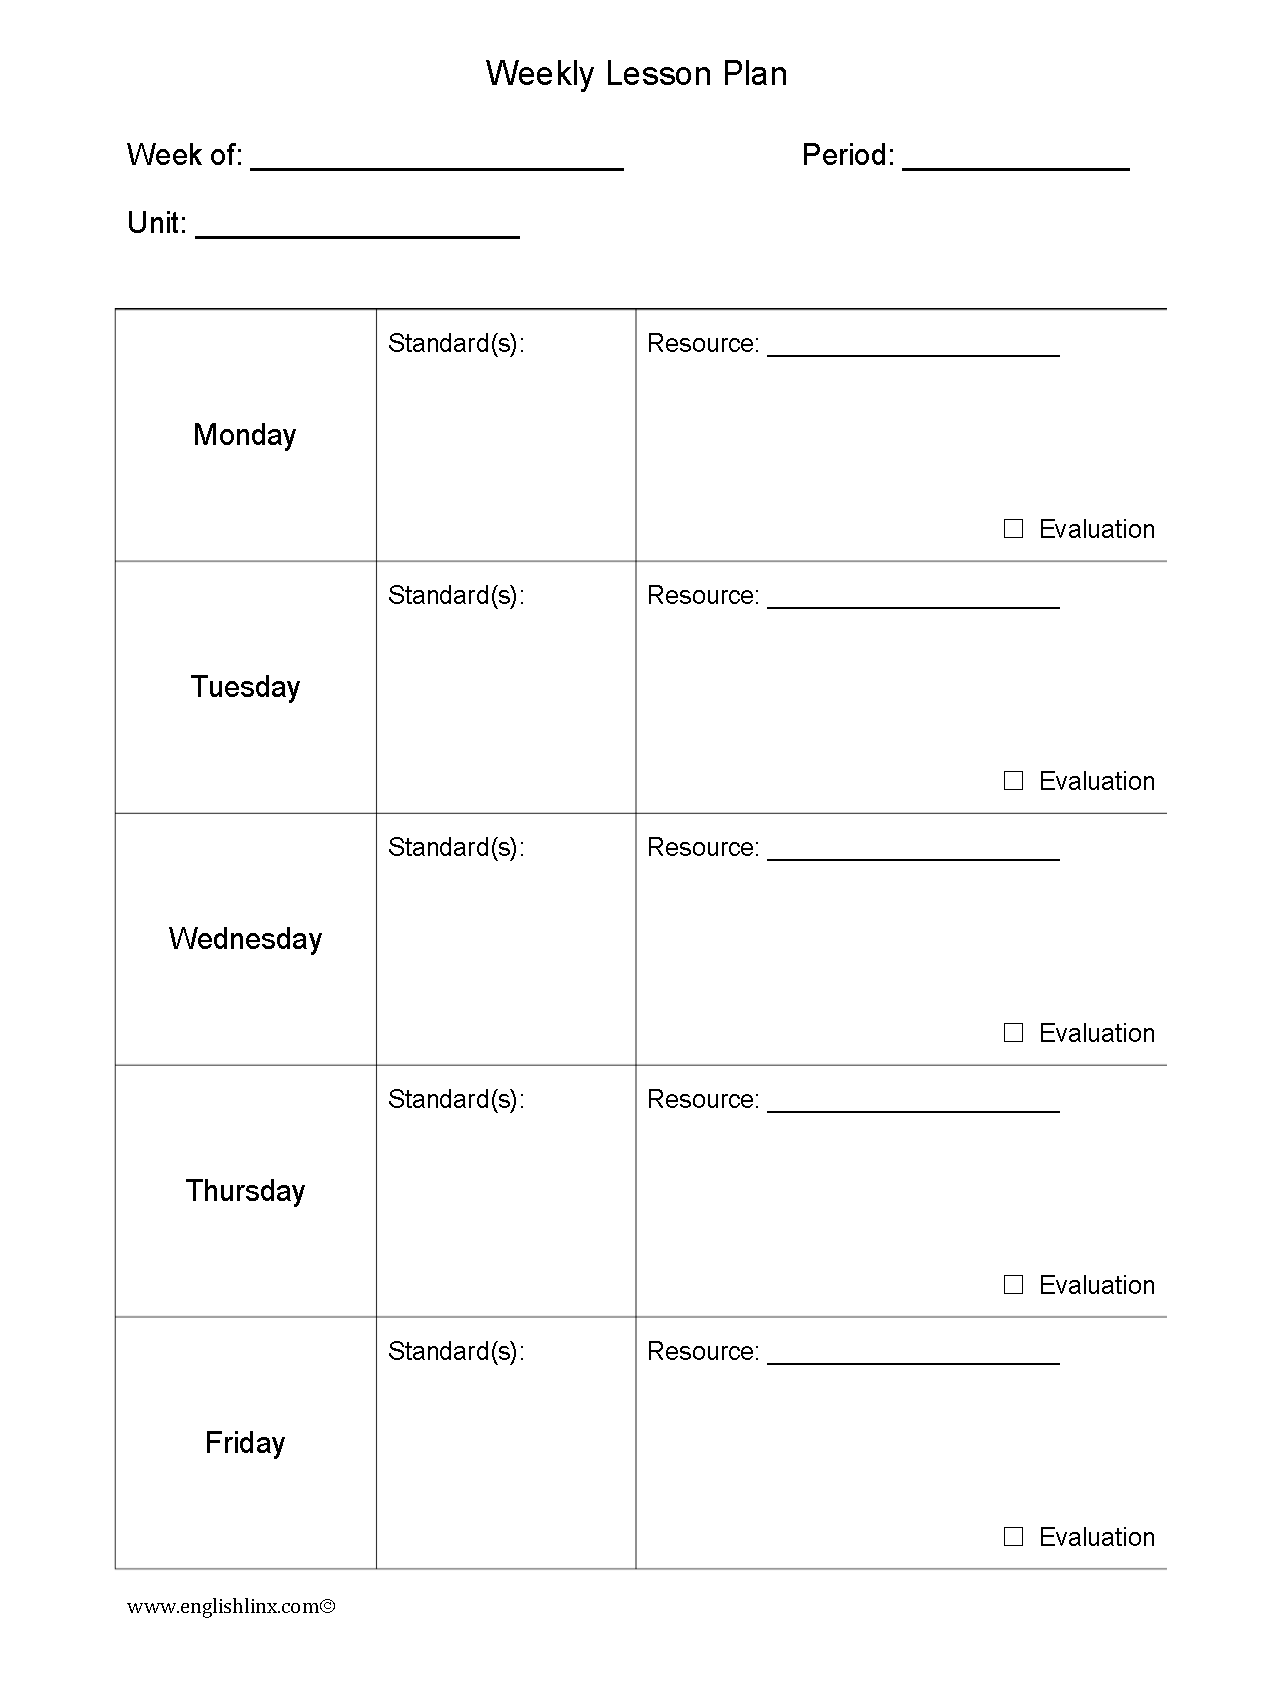 Fun Weekly Lesson Plan Template